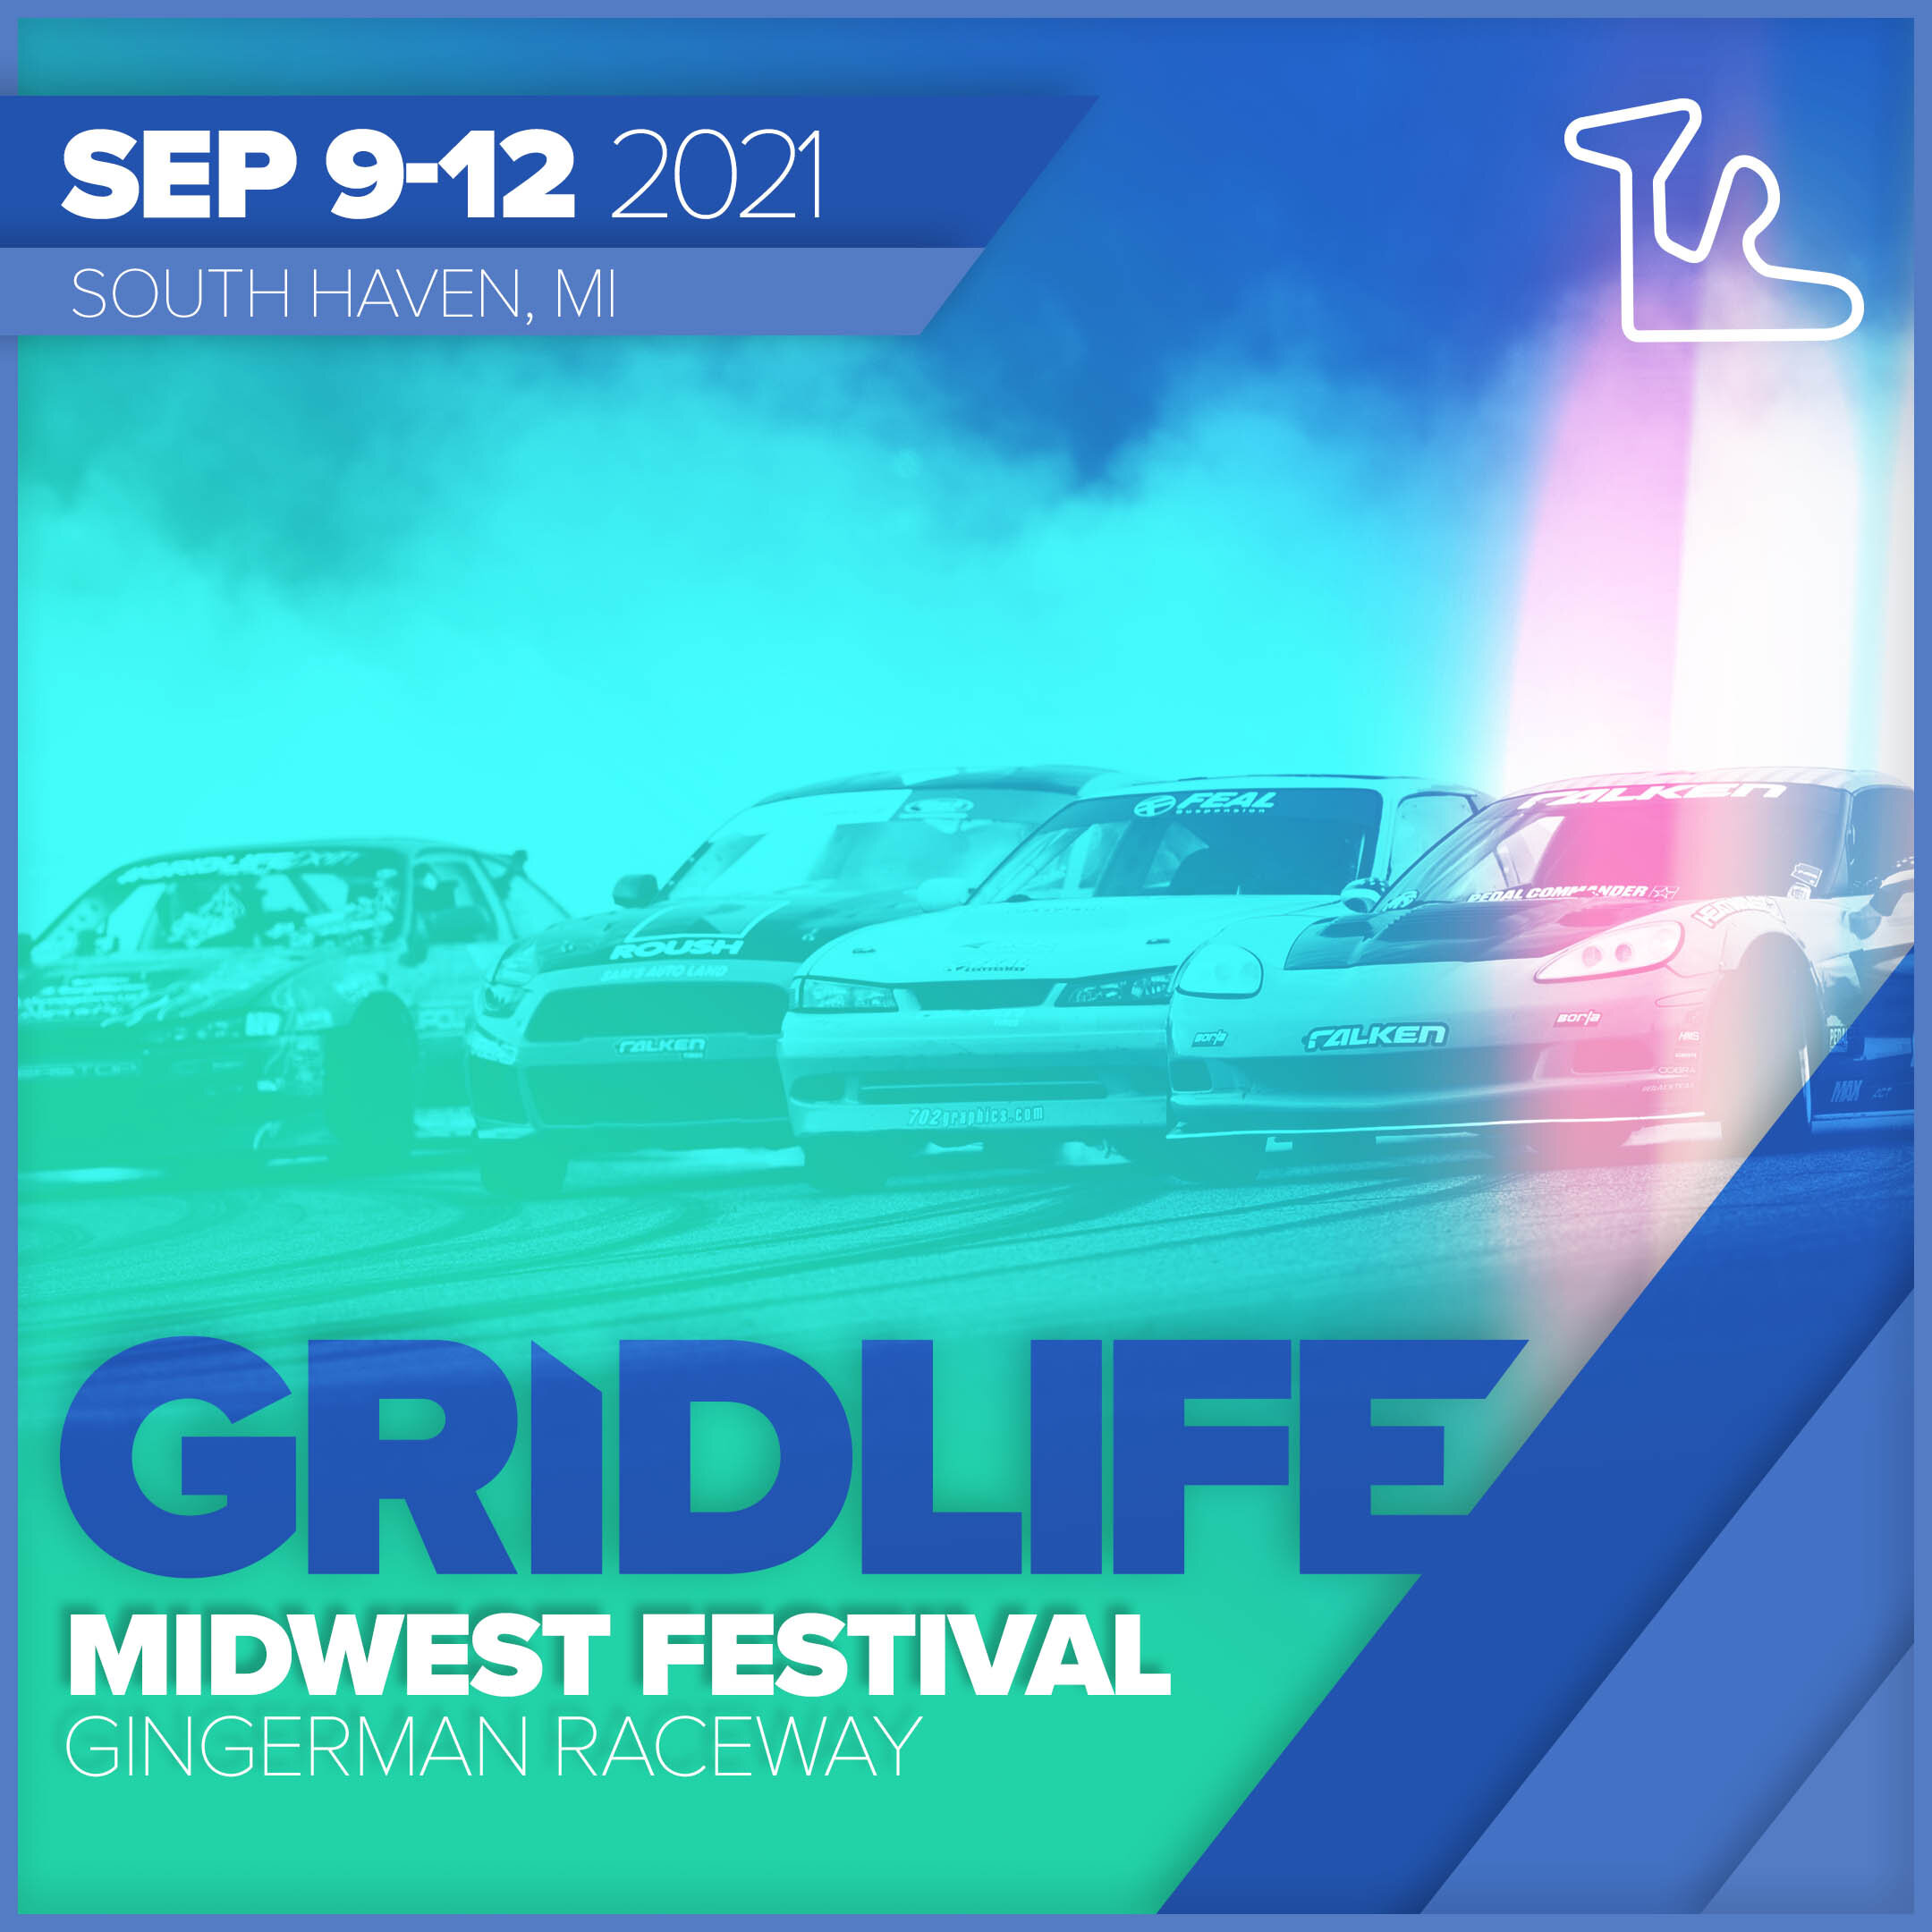 GRIDLIFE Midwest Festival